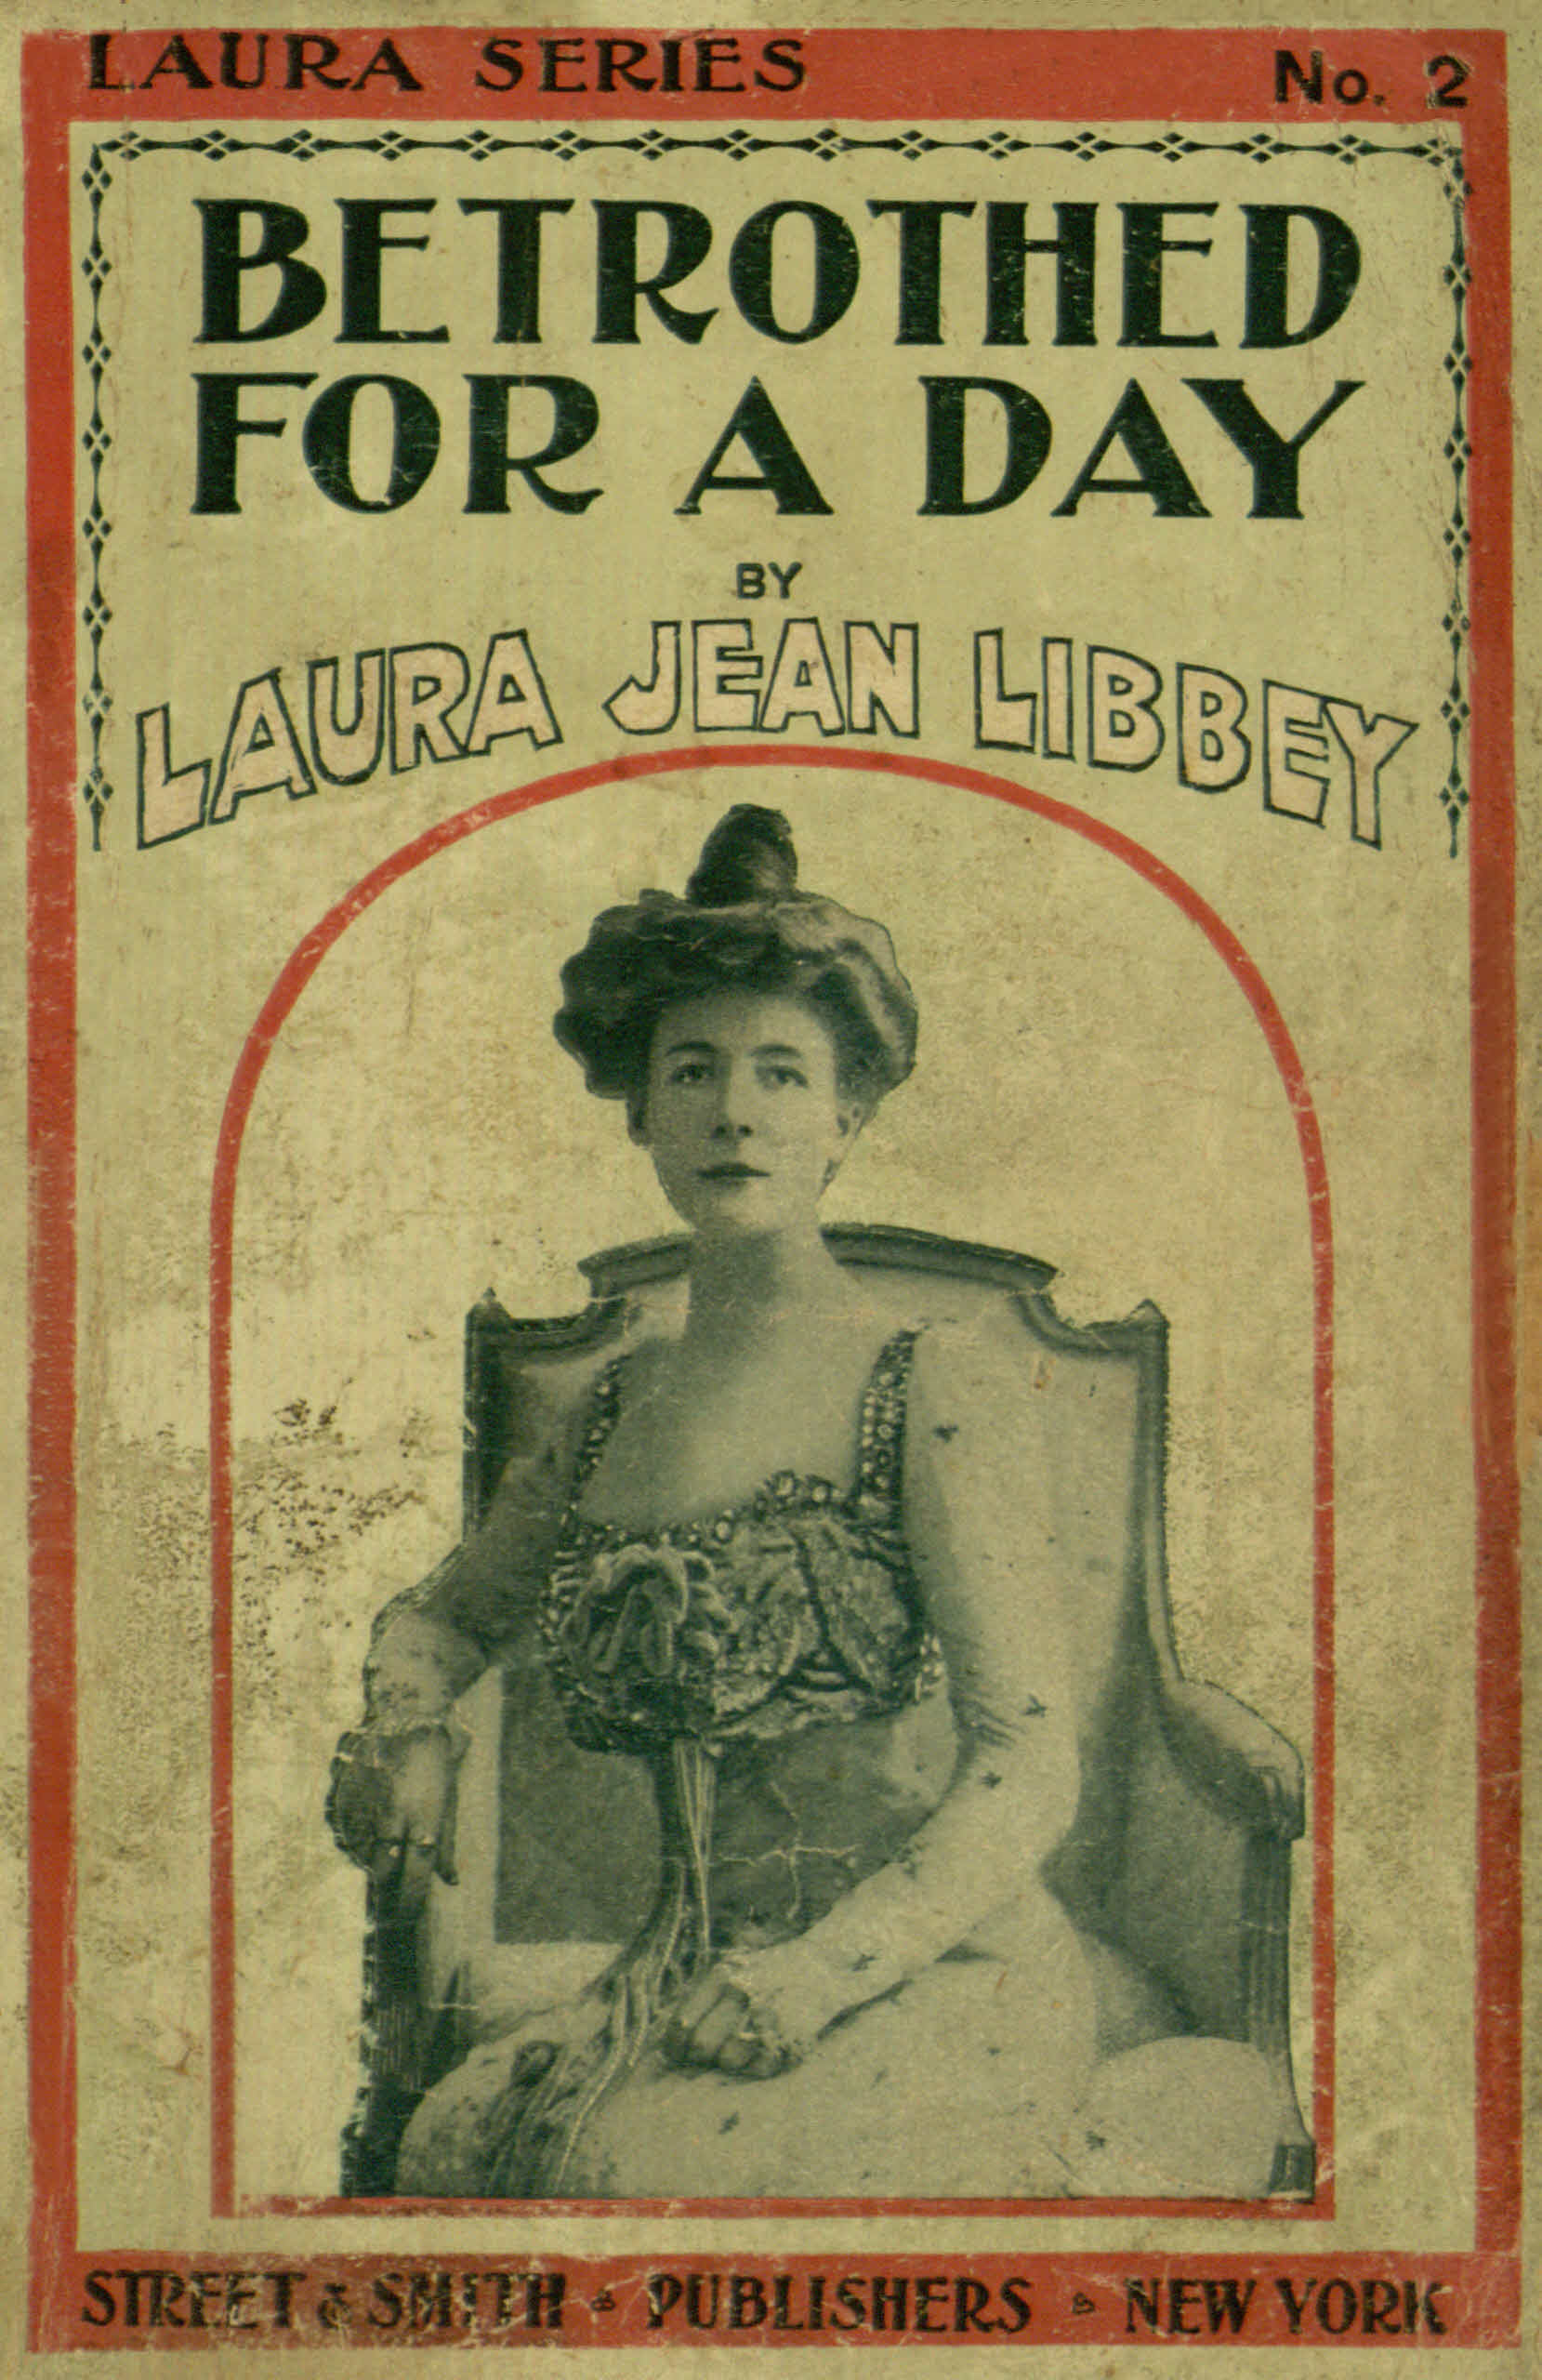 Betrothed for a Day, by Laura Jean Libbey—A Project Gutenberg eBook pic photo picture